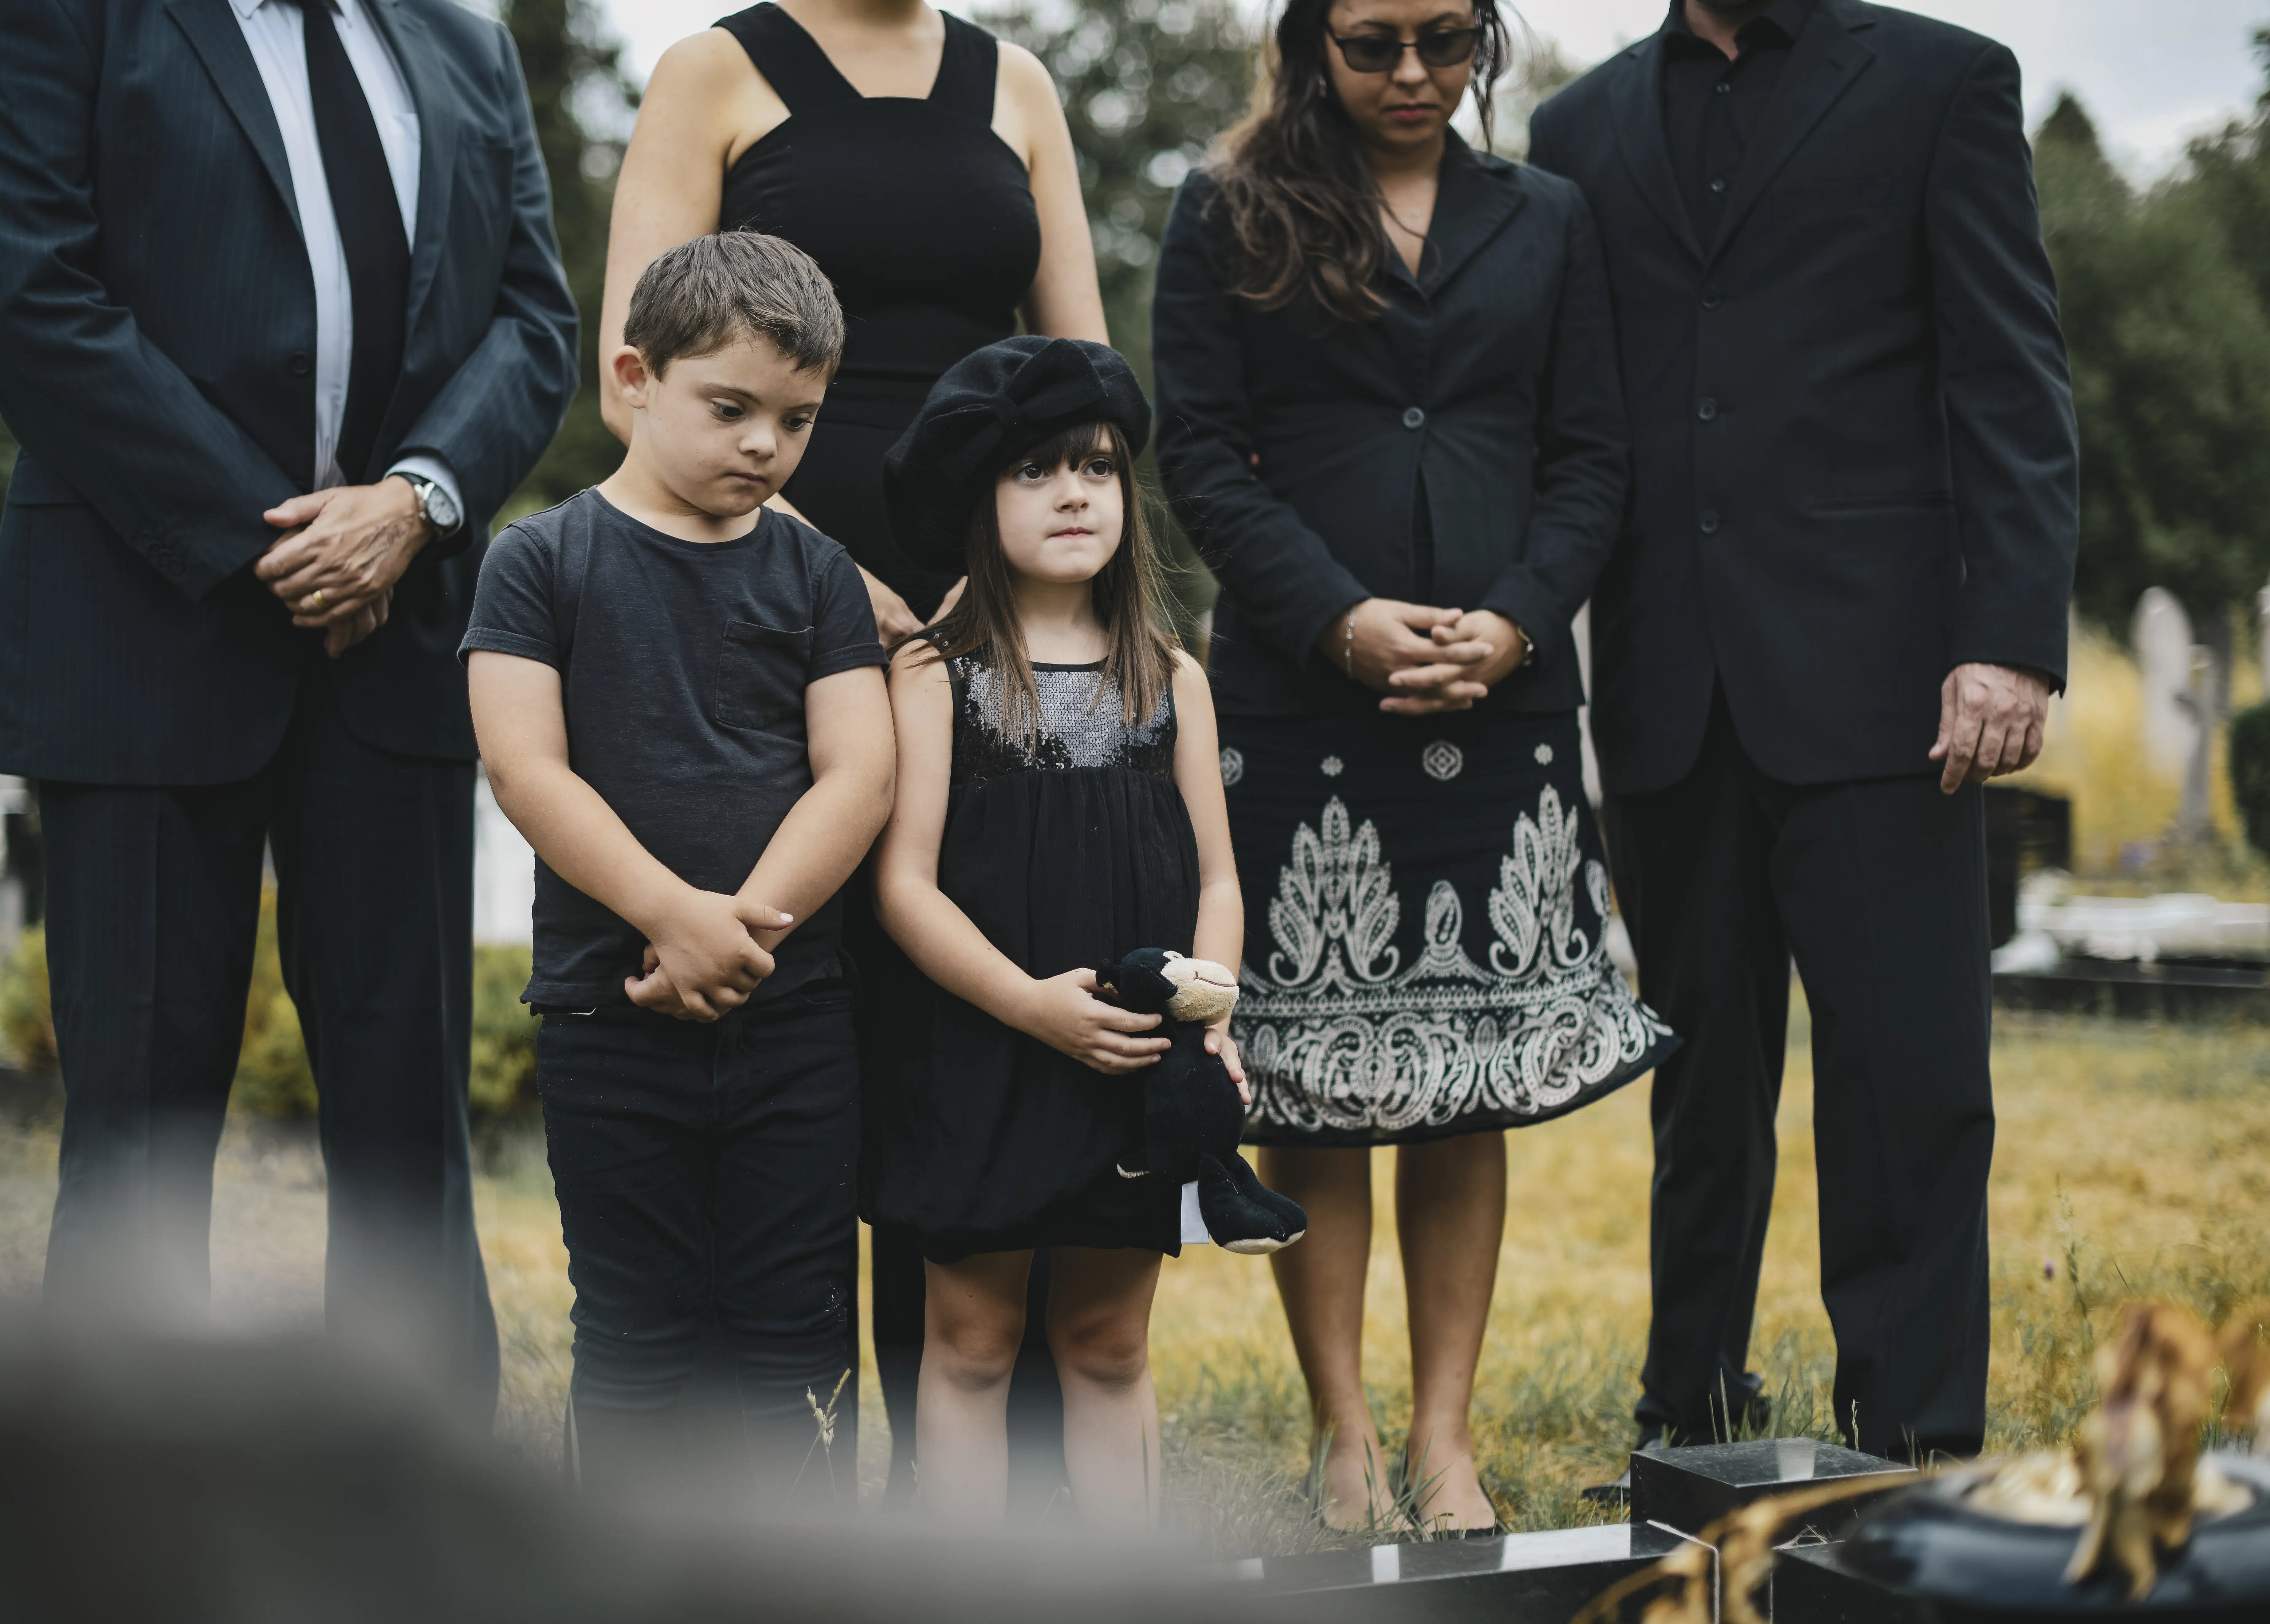 Sad Grandkids Standing by the Grave - Redeemed Life Counseling